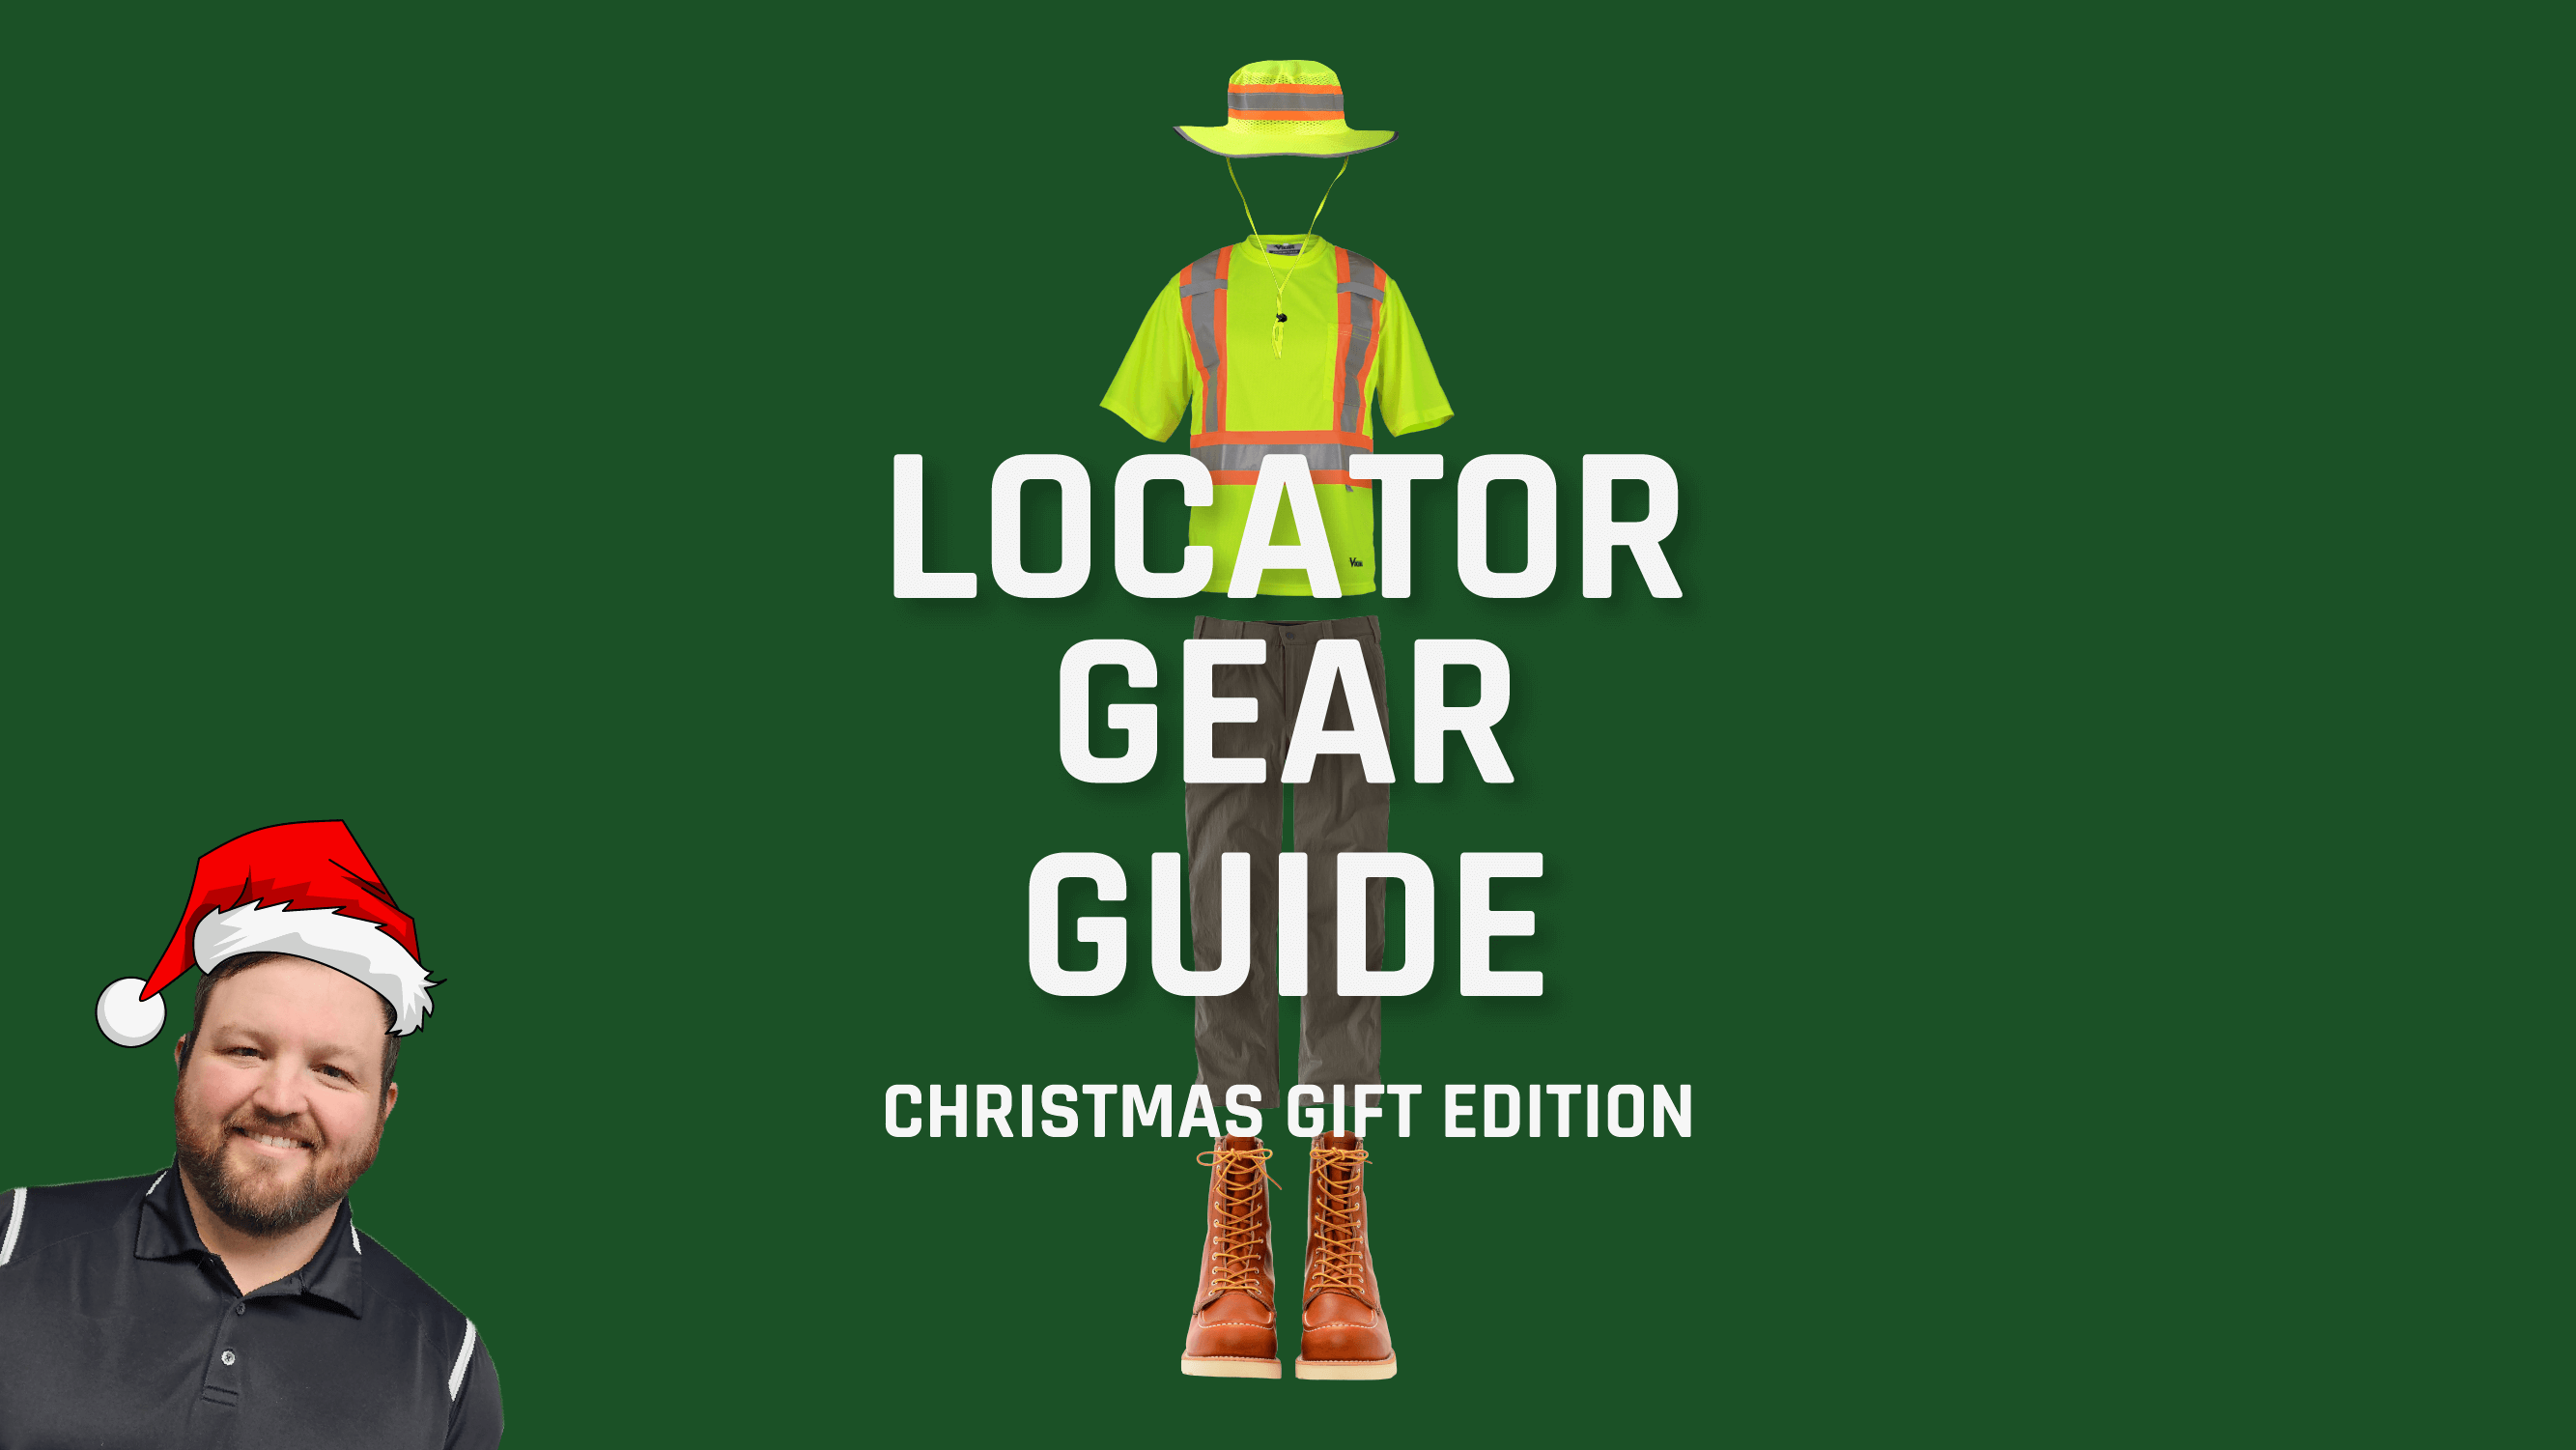 Featured image for “LOCATOR GEAR GUIDE”